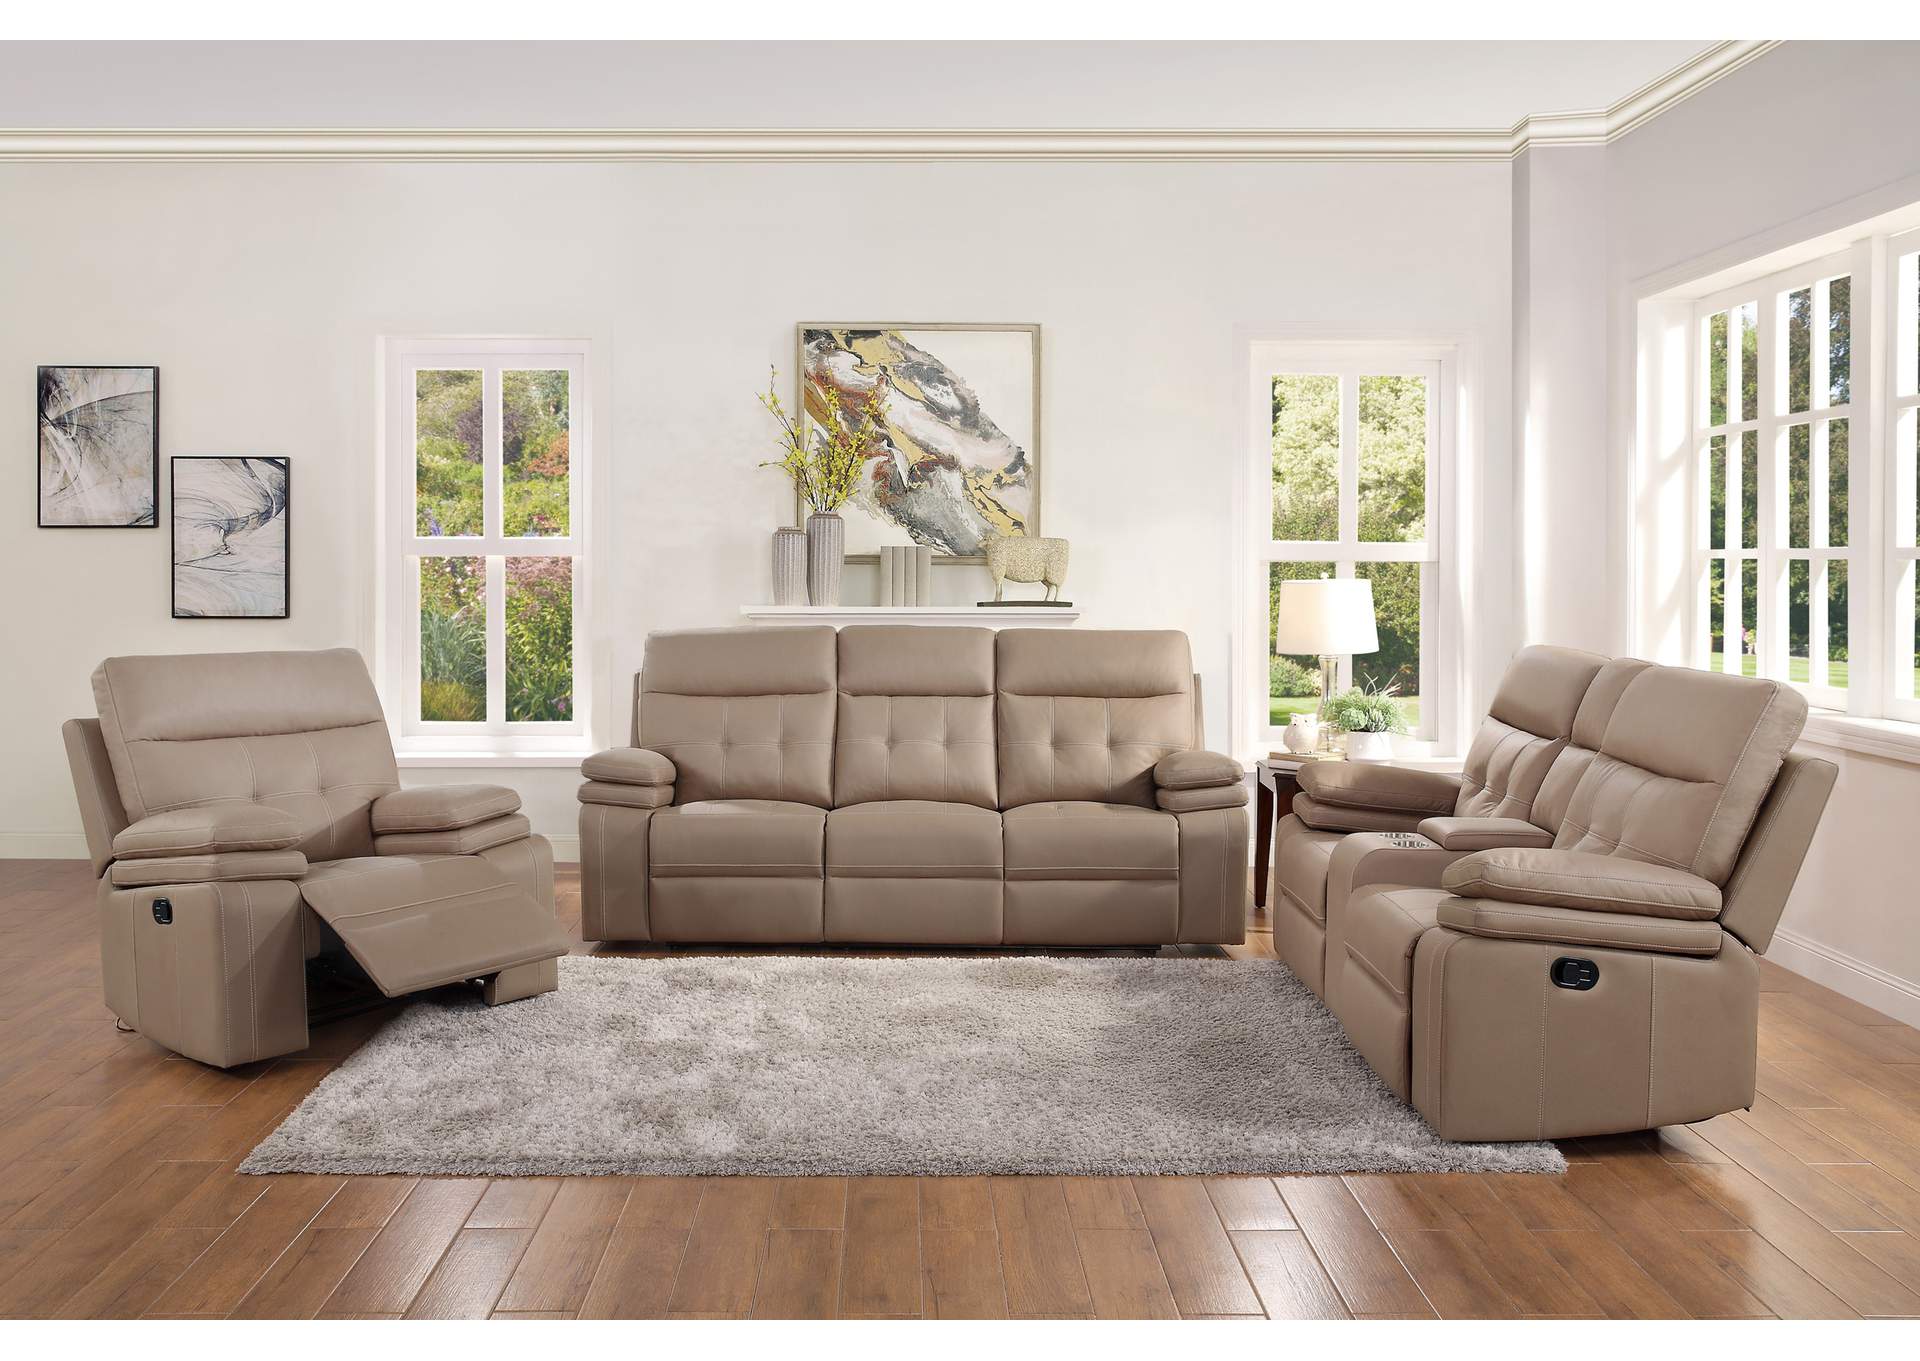 Brown Double Reclining Sofa,Homelegance